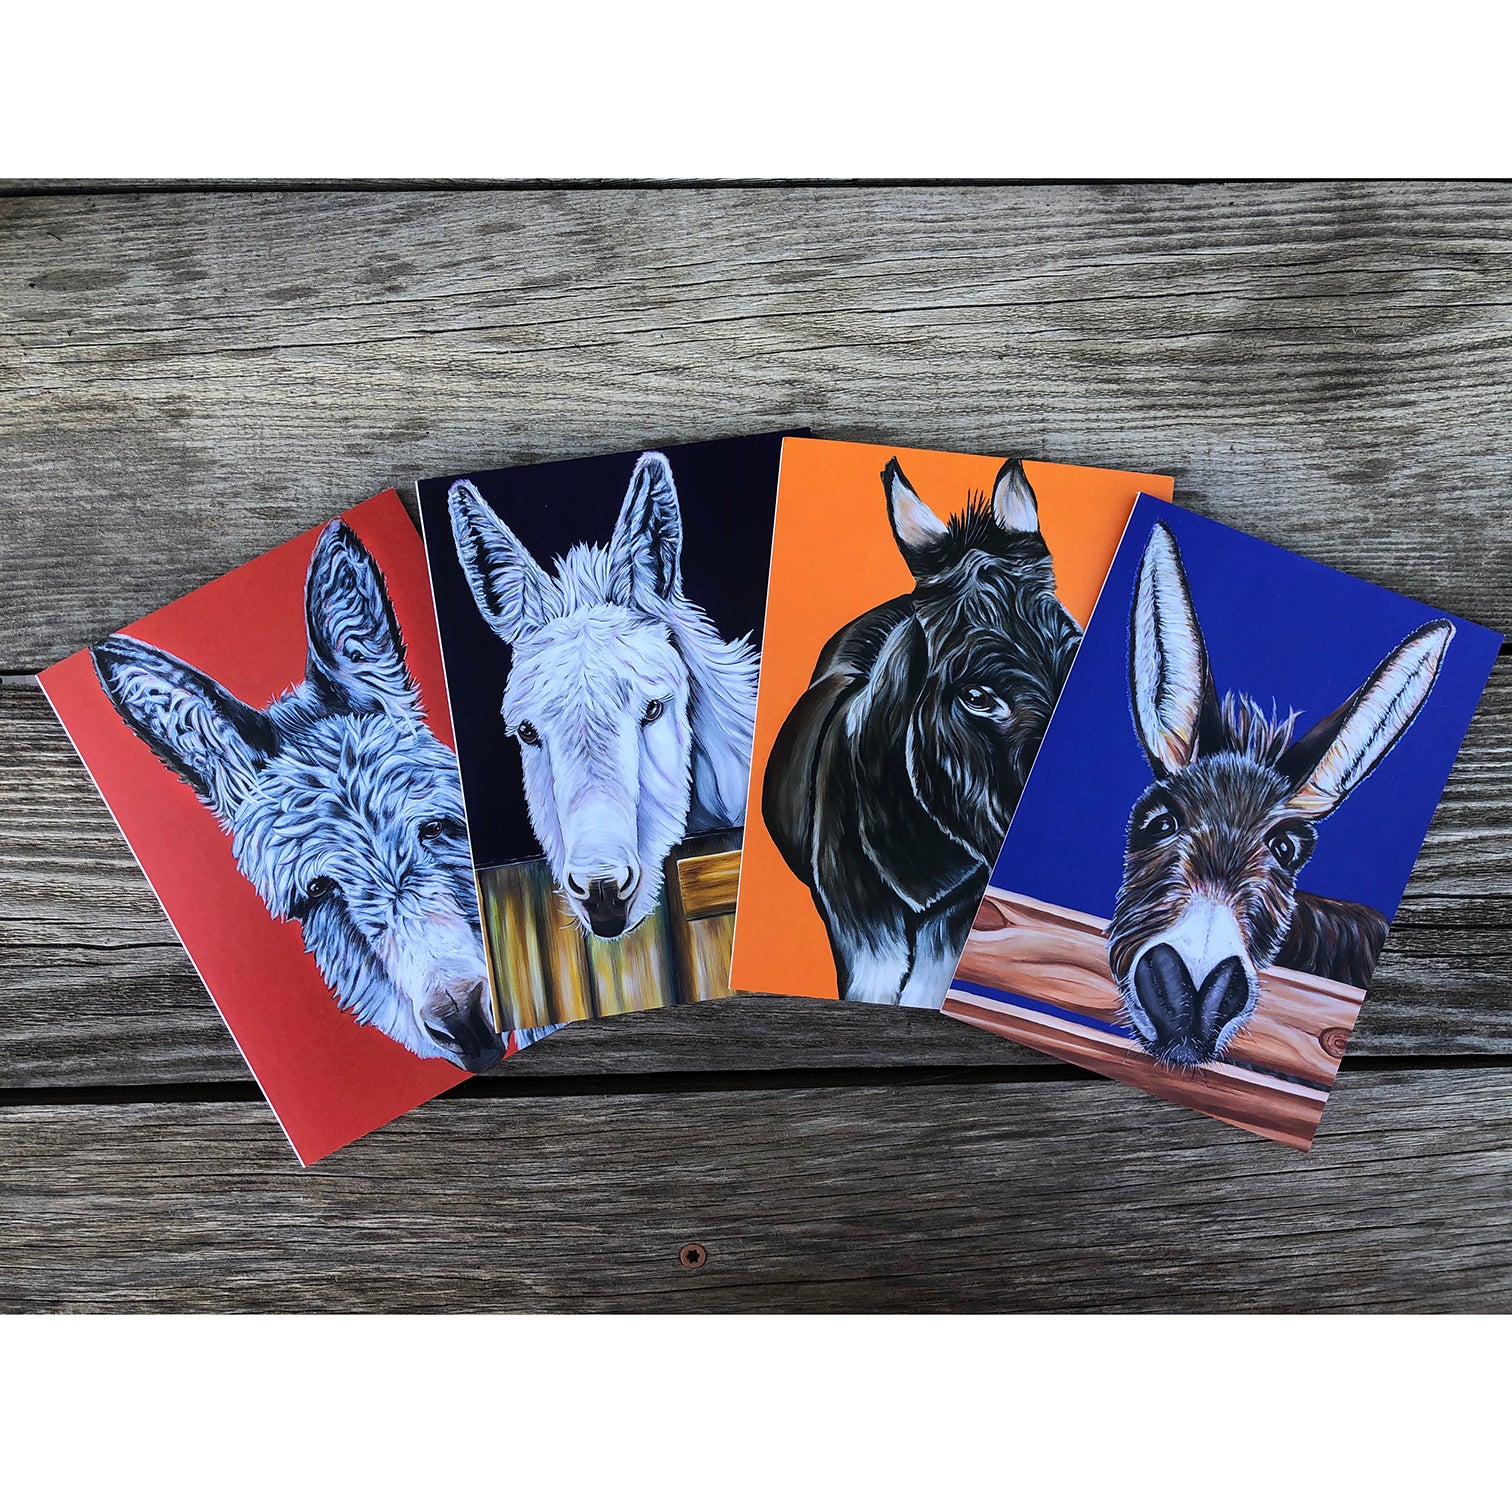 four featured  rescue donkeys in this greeting card pack from the Isle of Wight Donkey Sanctuary